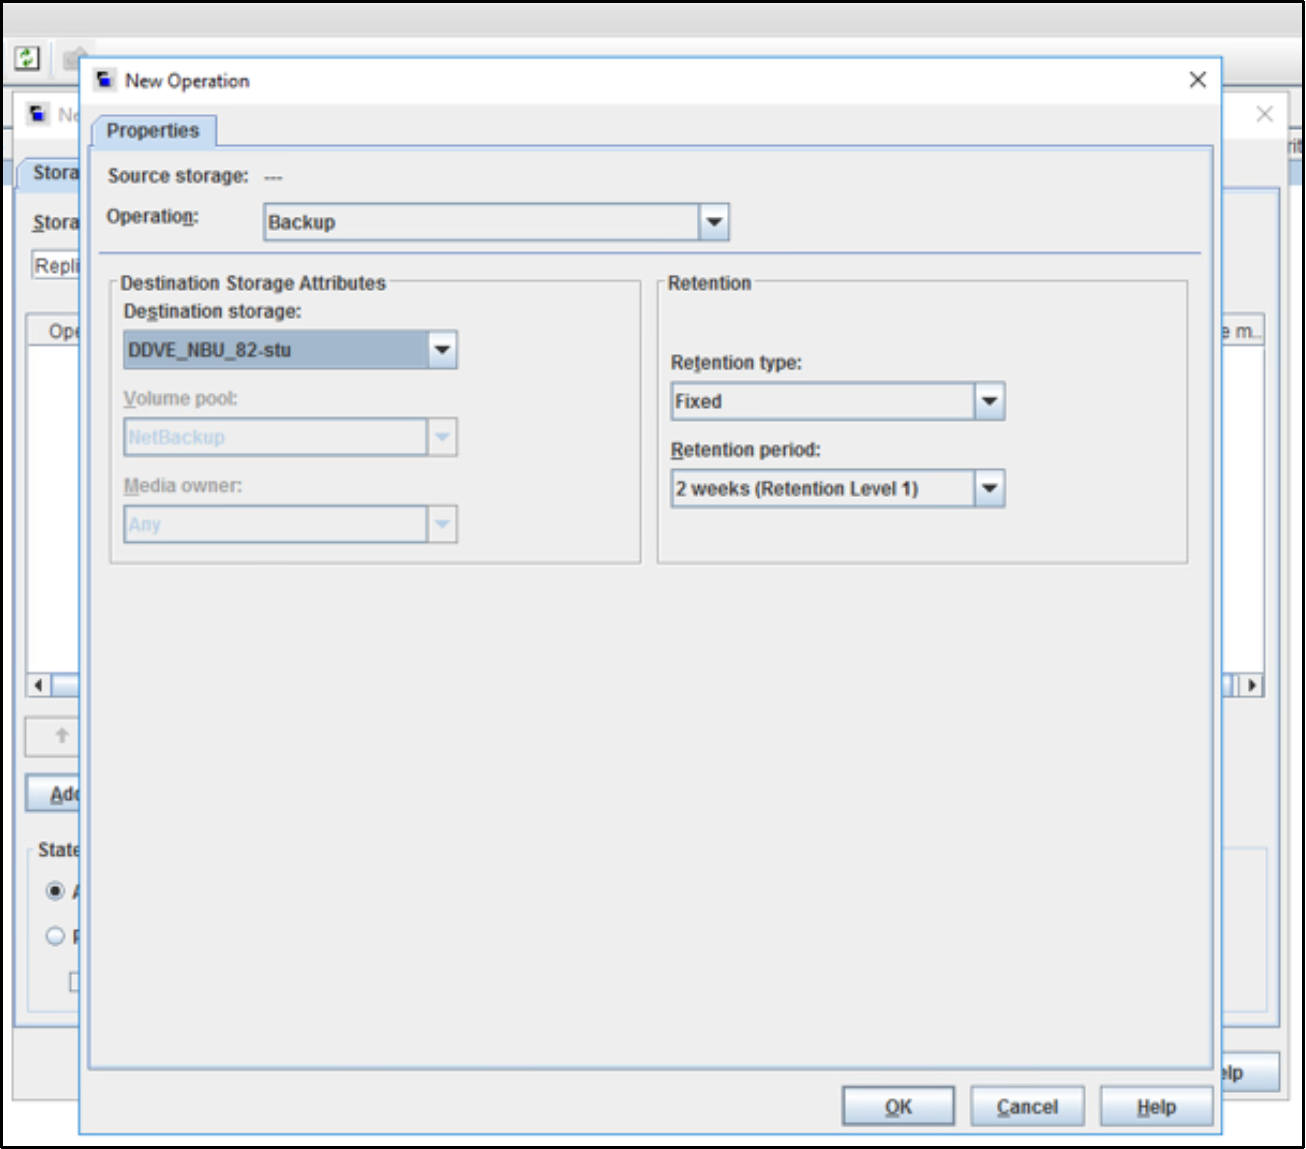 This image shows the option to create an SLP on source primary server and to add the backup operation and select the source Storage Unit as the destination storage.